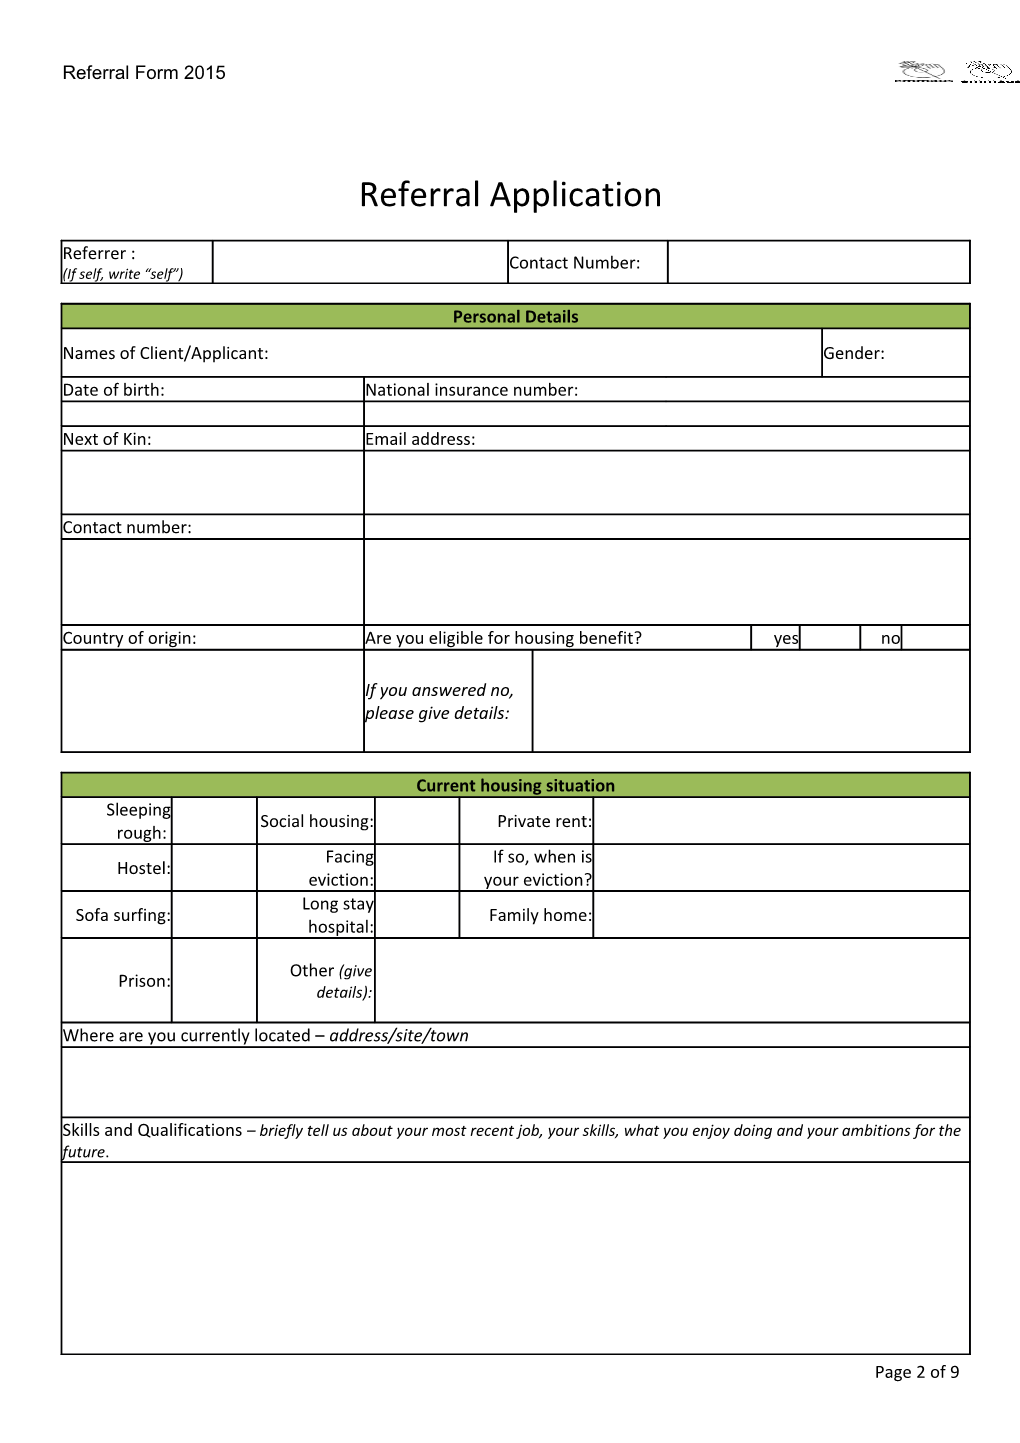 Referral Form 2015